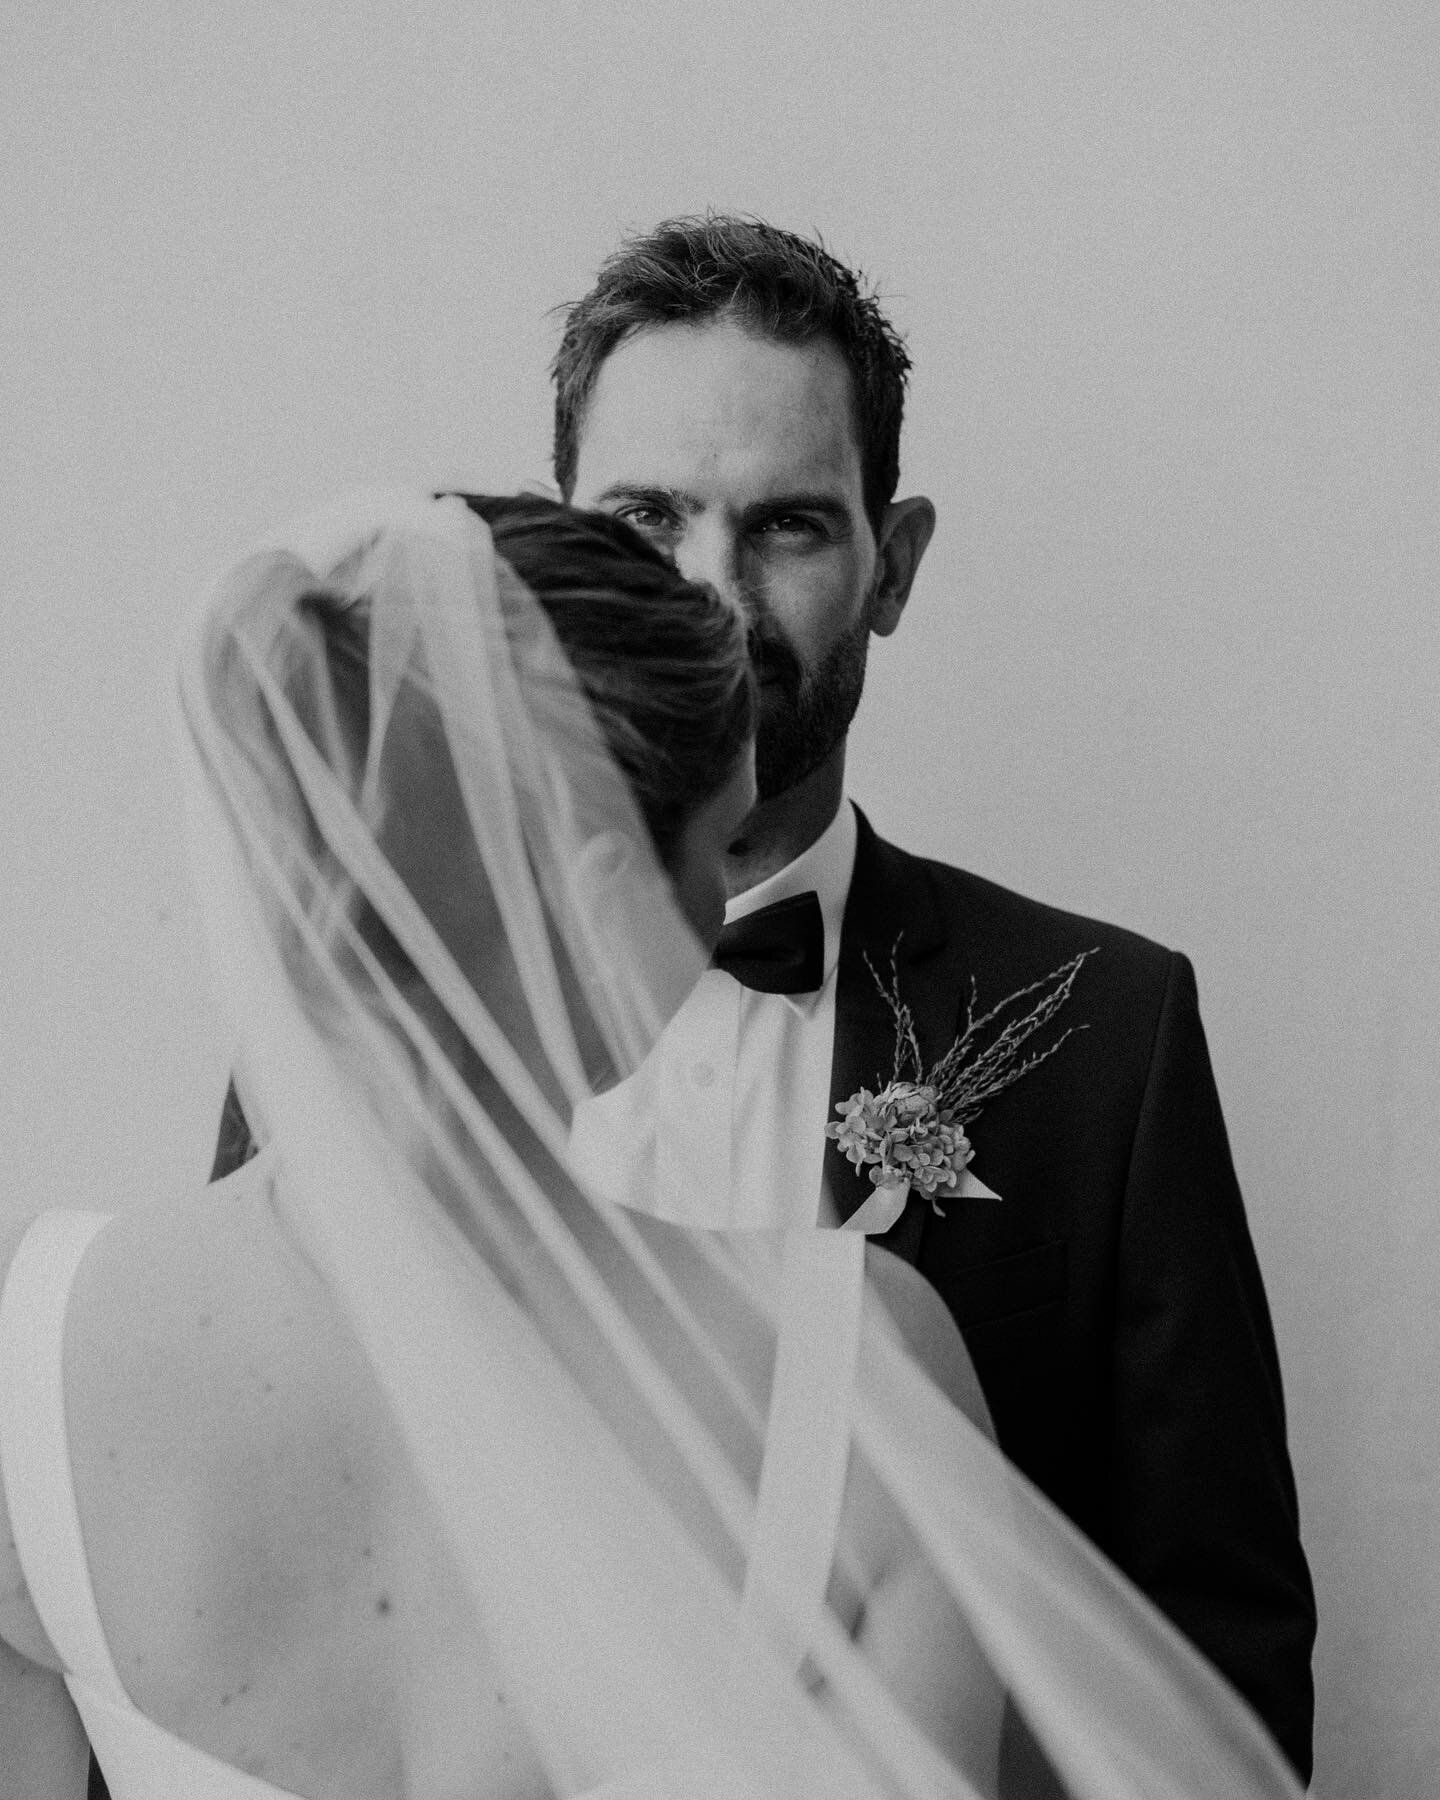 Keiron // looking just a bit smug with his new wife 

Captured by @vargamurphy